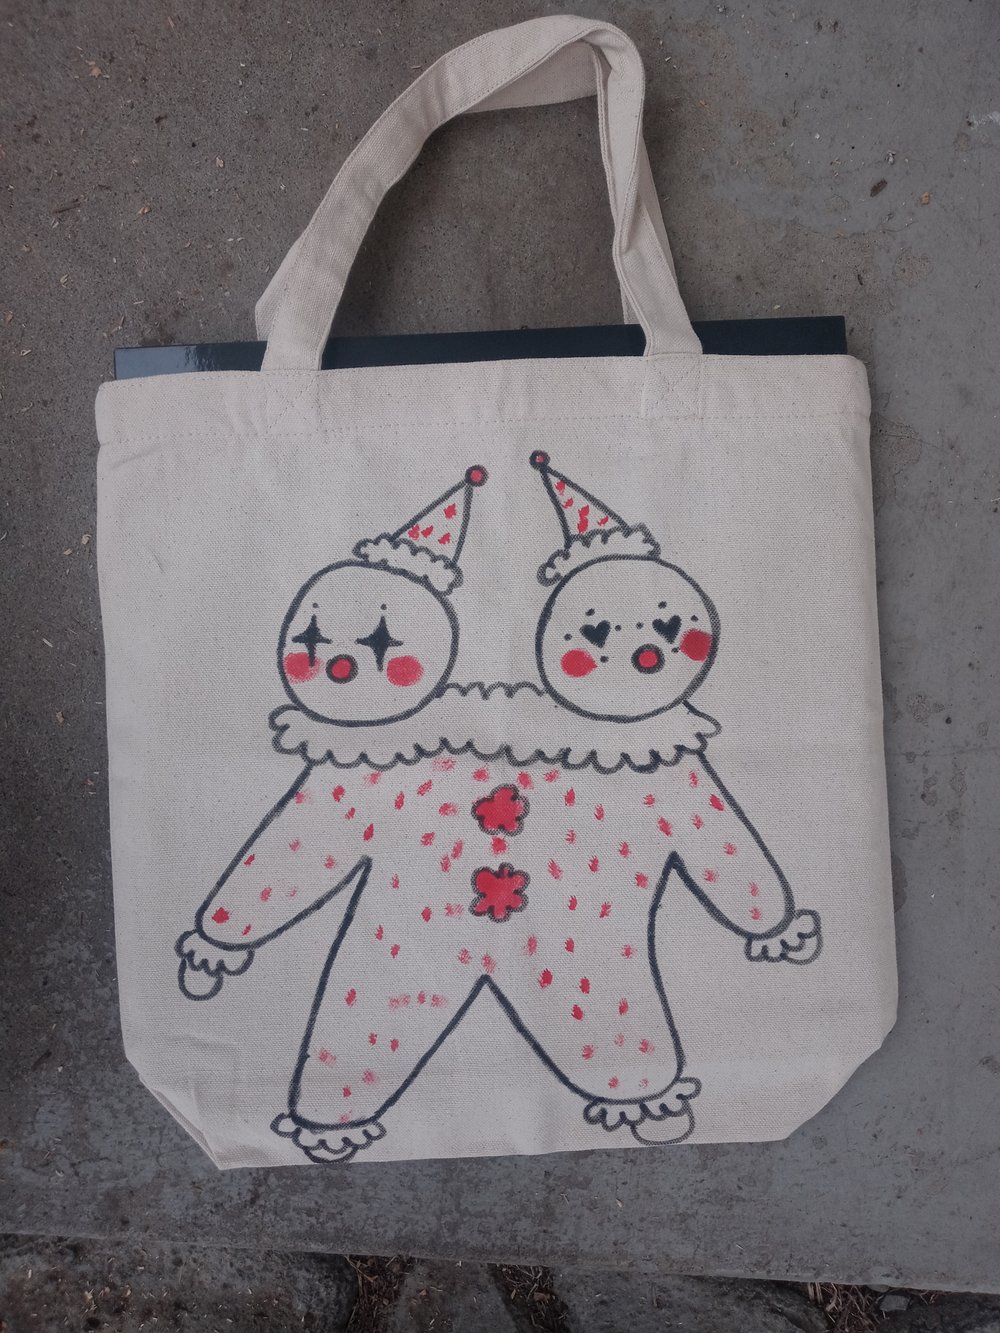 two-headed clown tote